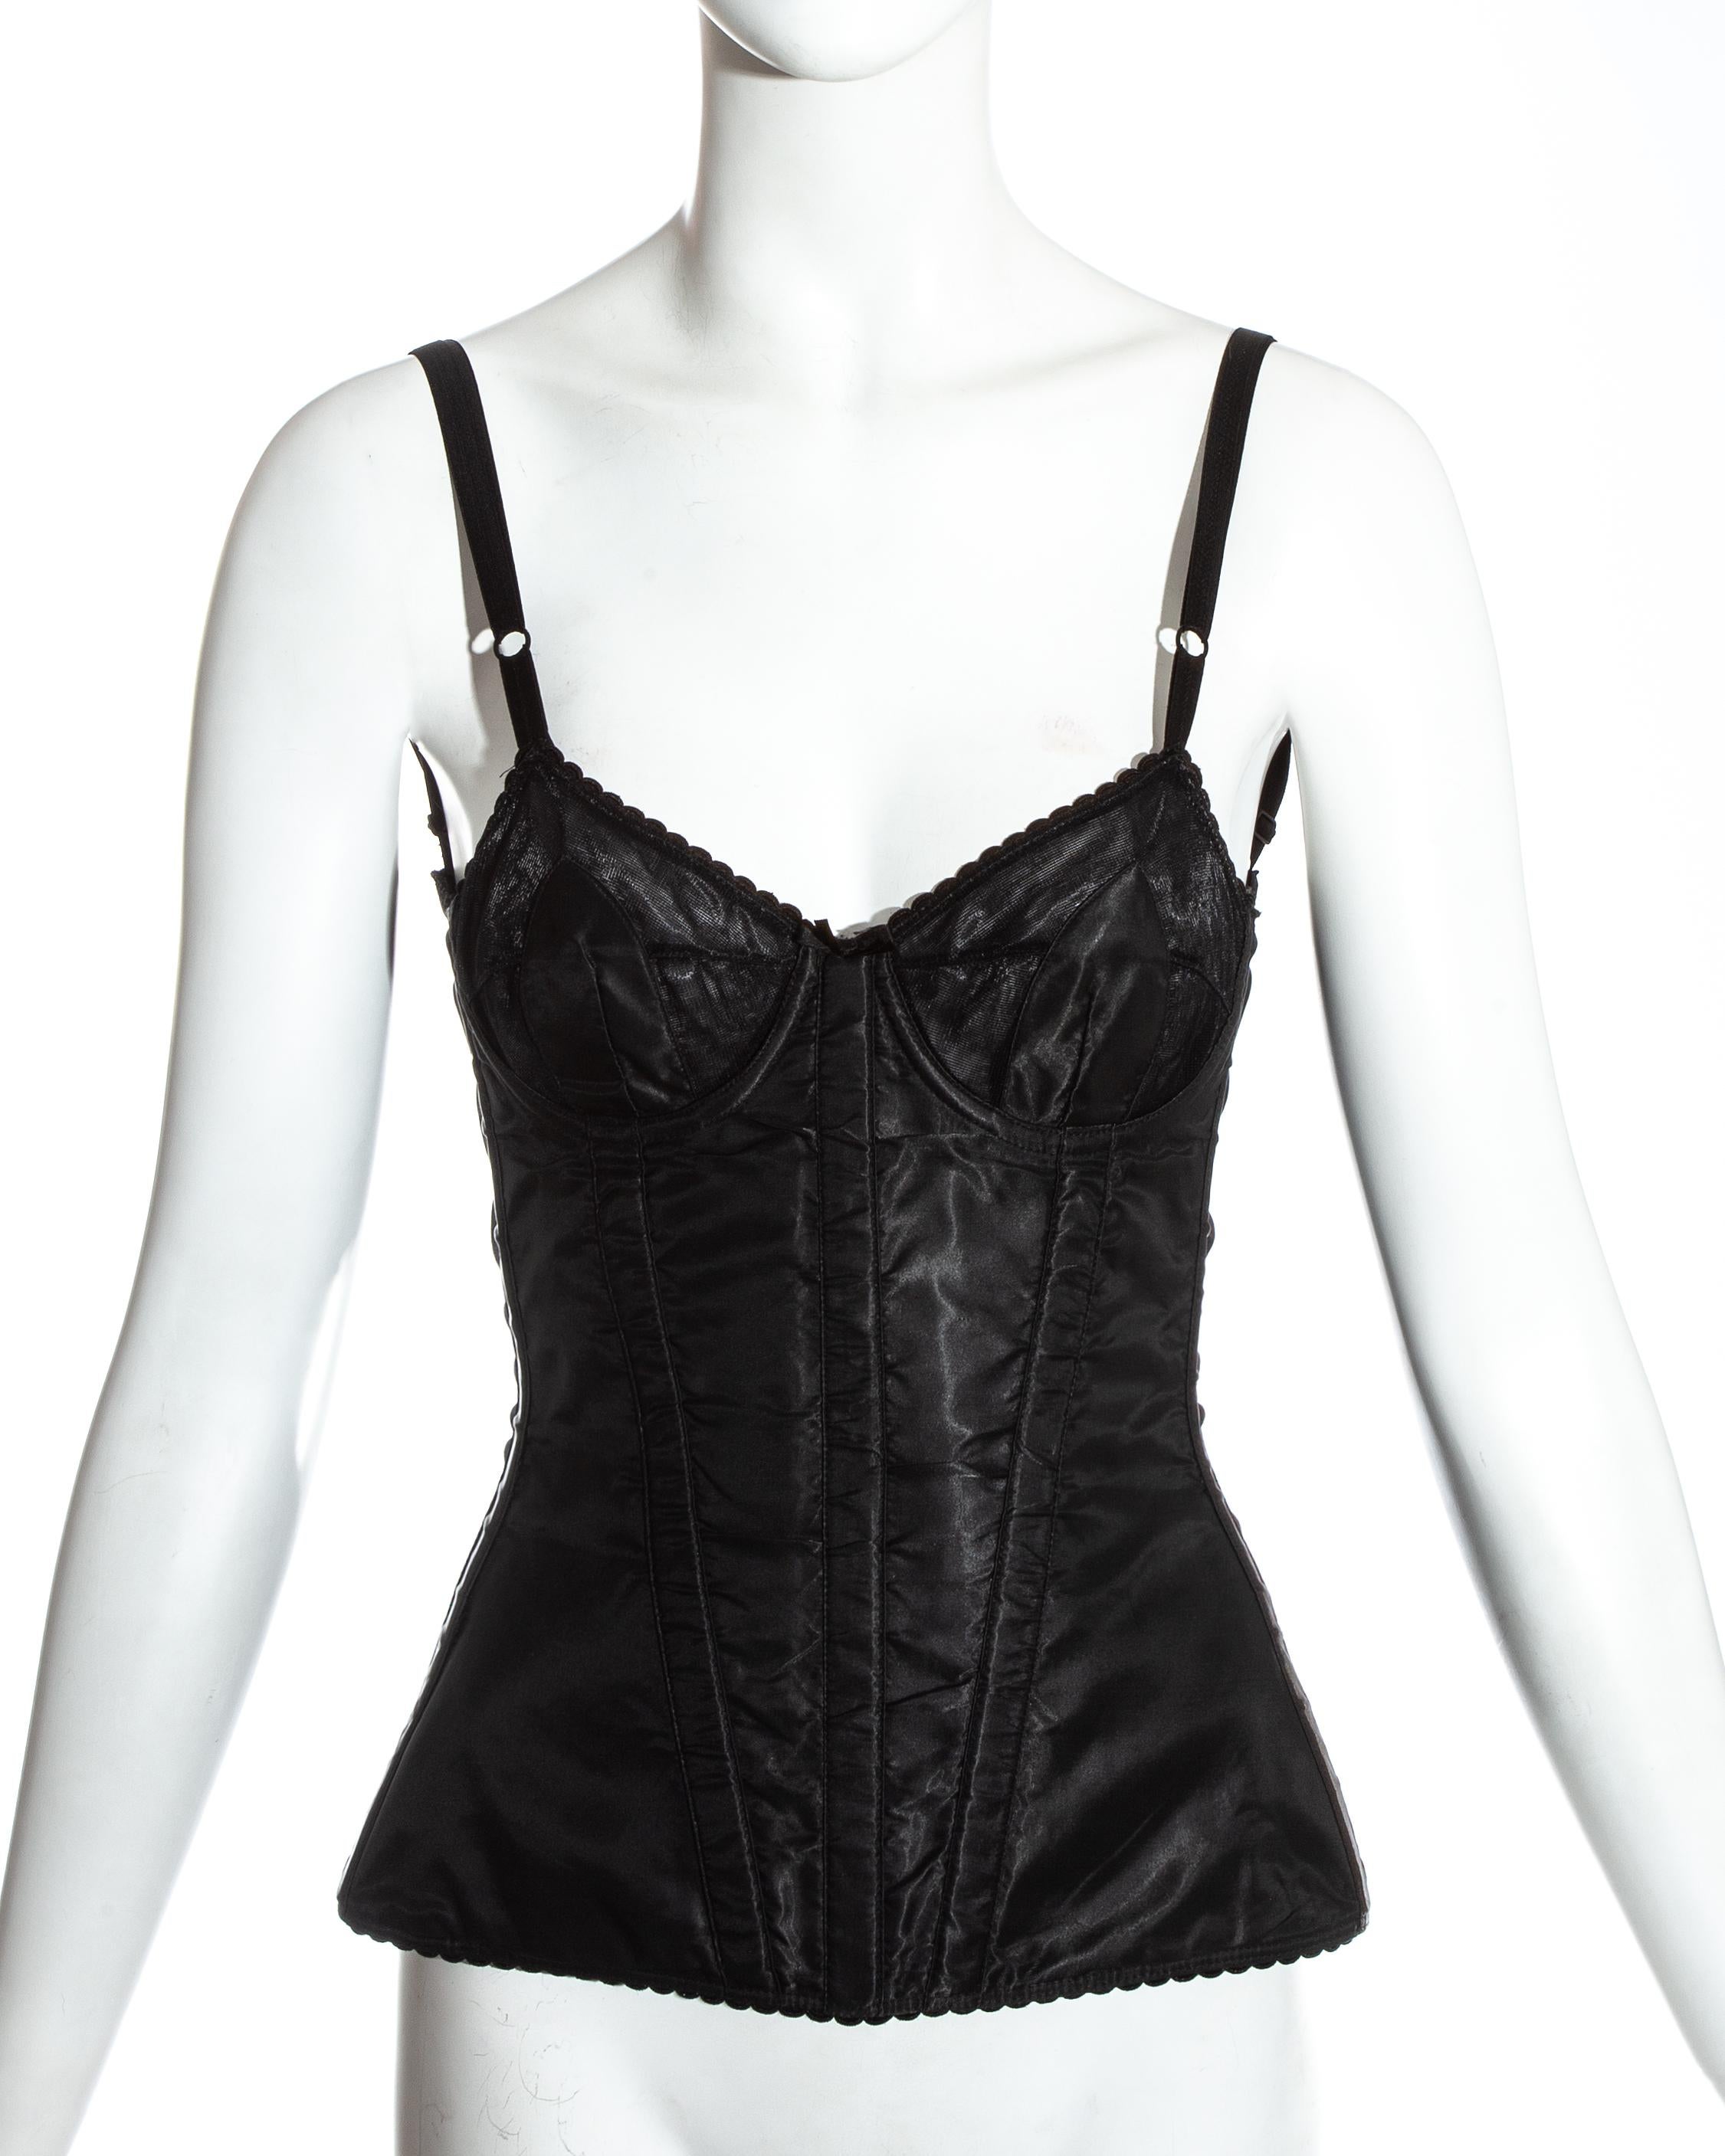 Dolce & Gabbana black satin and spandex evening corset with internal boning and hook and eye fastenings.

c. 1990s